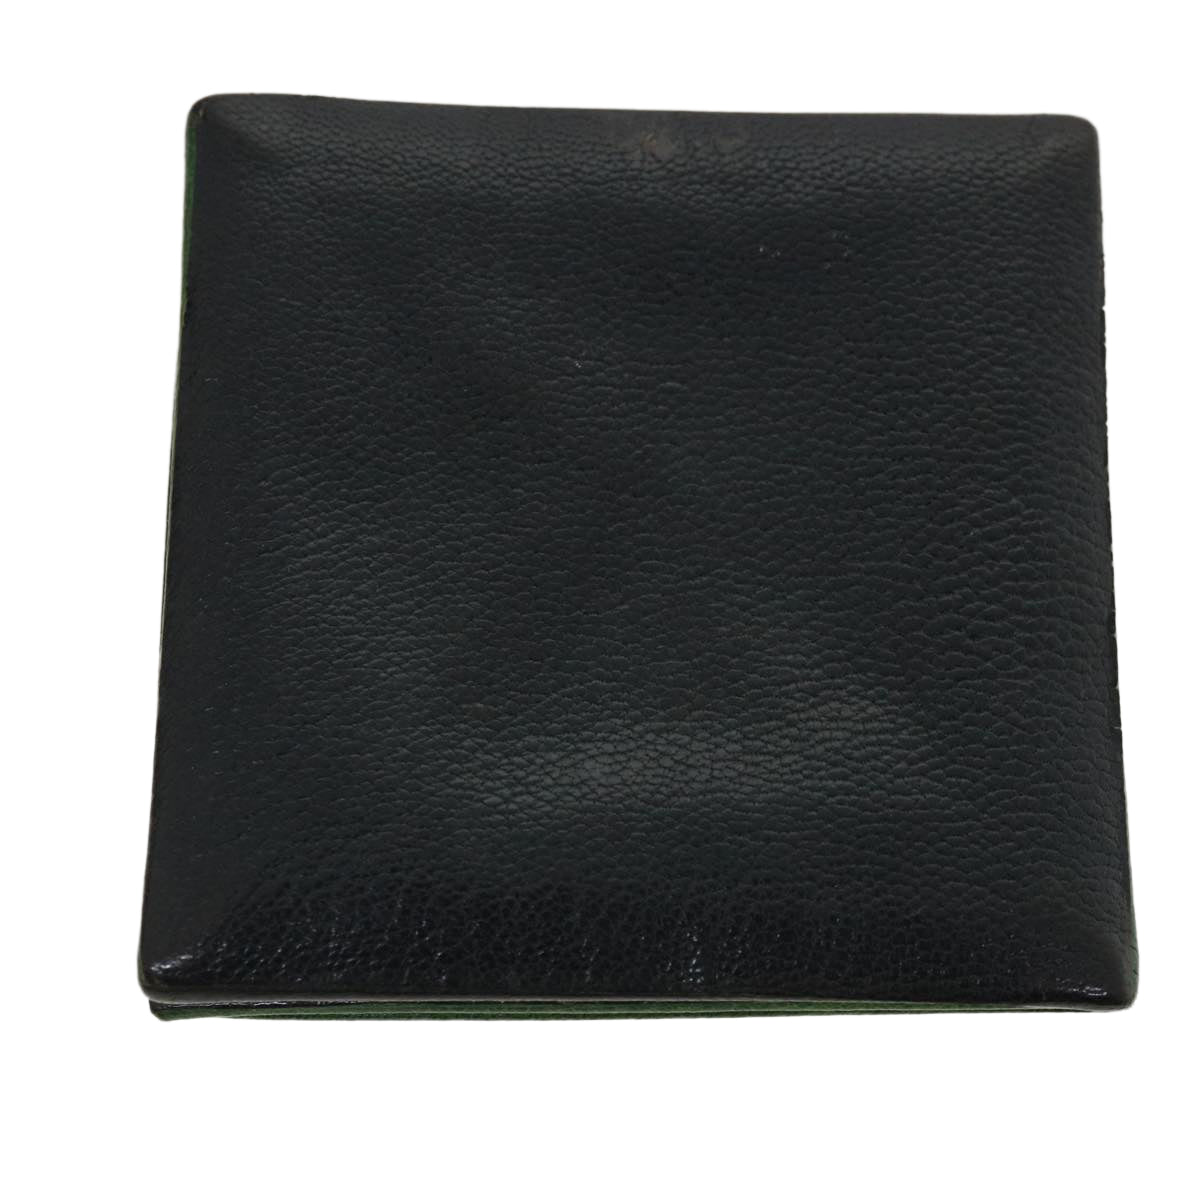 HERMES Accessory Case Leather Black Green Auth 35688 - 0